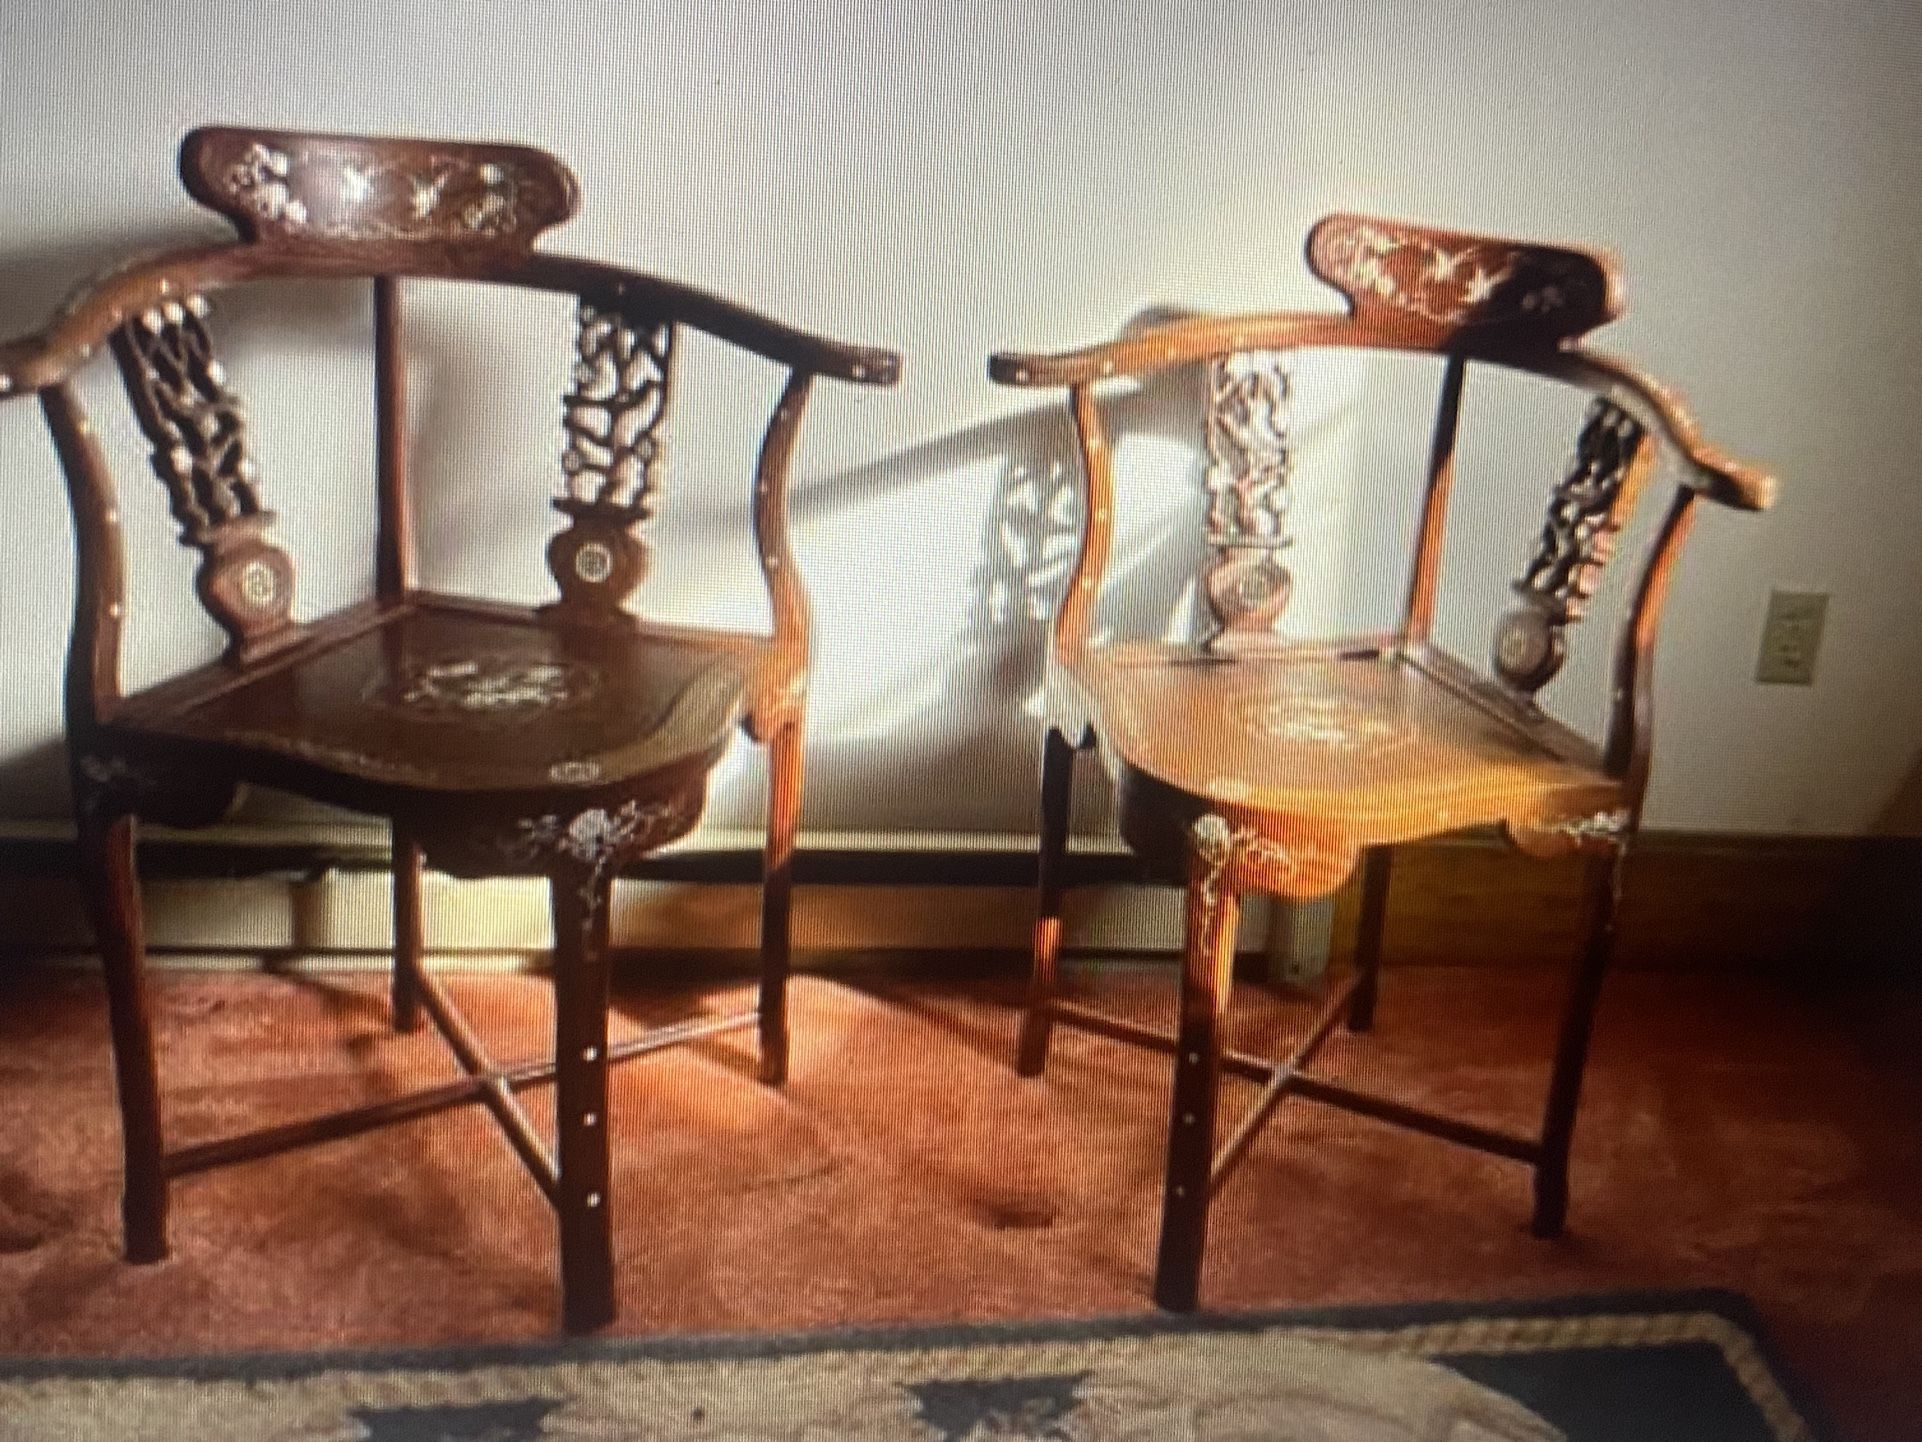 Hand-Carved, Chinese Corner Chairs with MOP Inlay